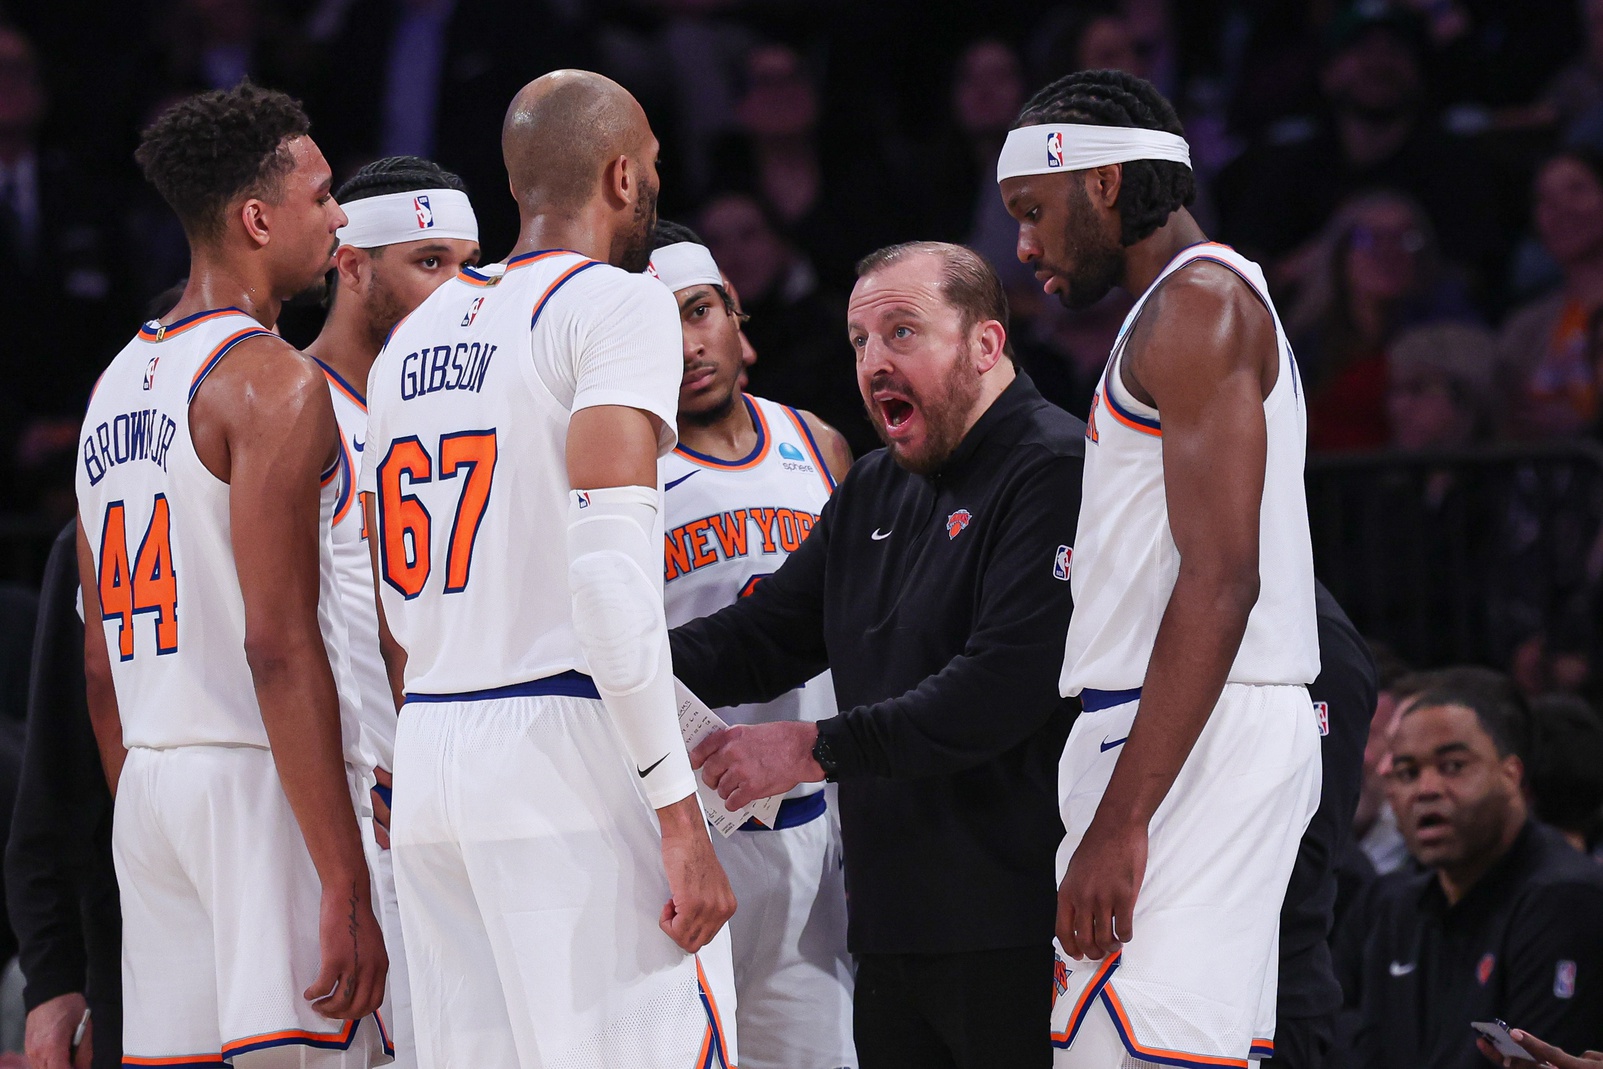 Tom Thibodeau has pieces galore on the New York Knicks bench.